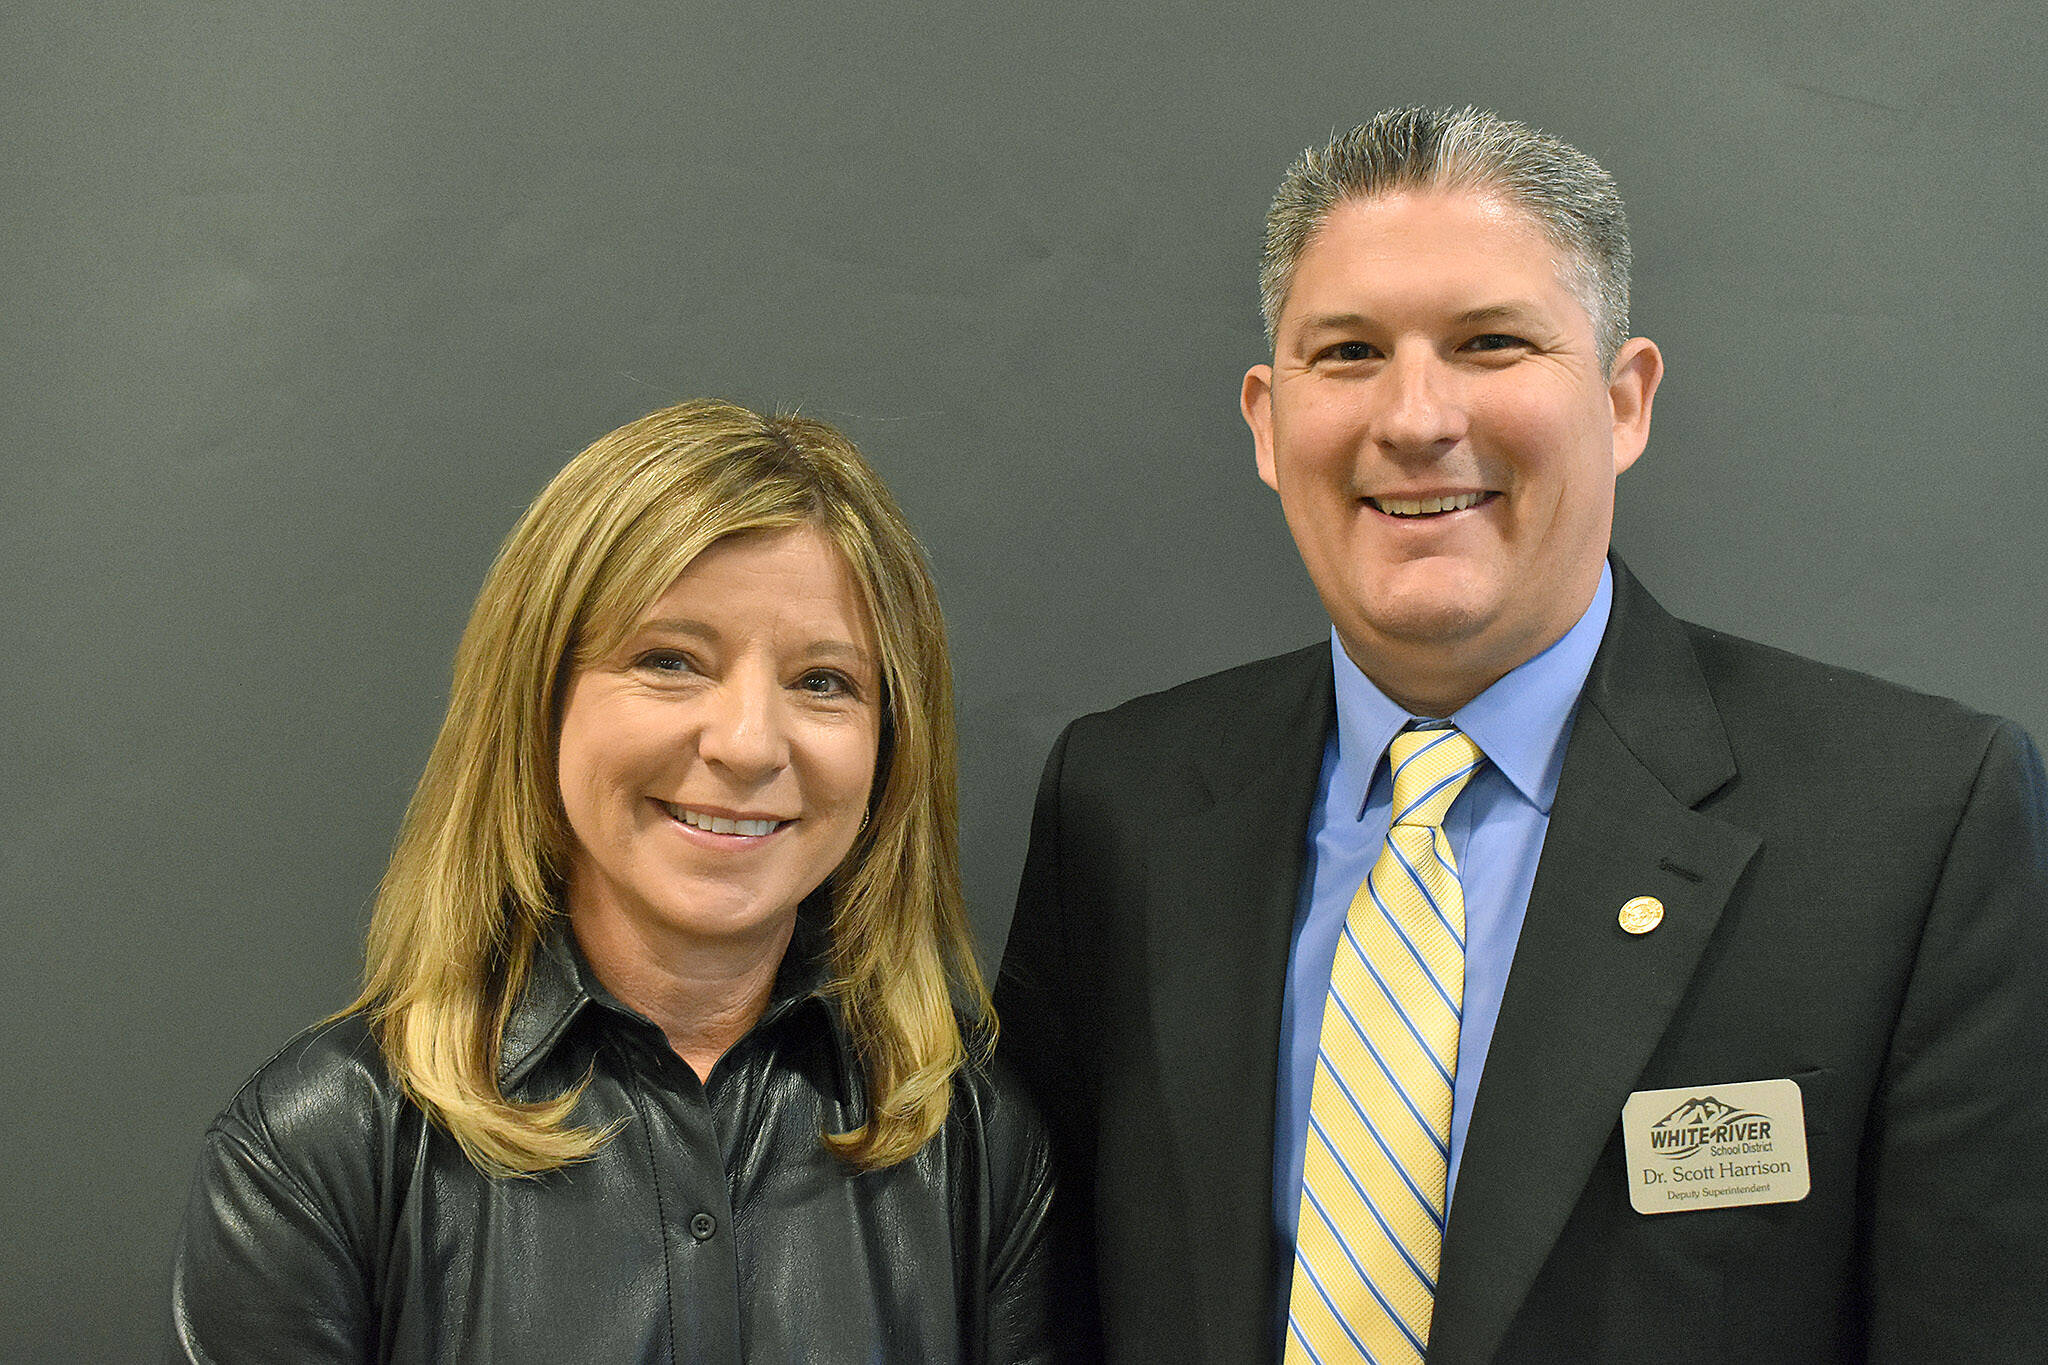 Photo by Alex Bruell
Janel Keating Hambly will be retiring from the role of White River School District superintendent after this school year, and current deputy superintendent Dr. Scott Harrison will be taking over.